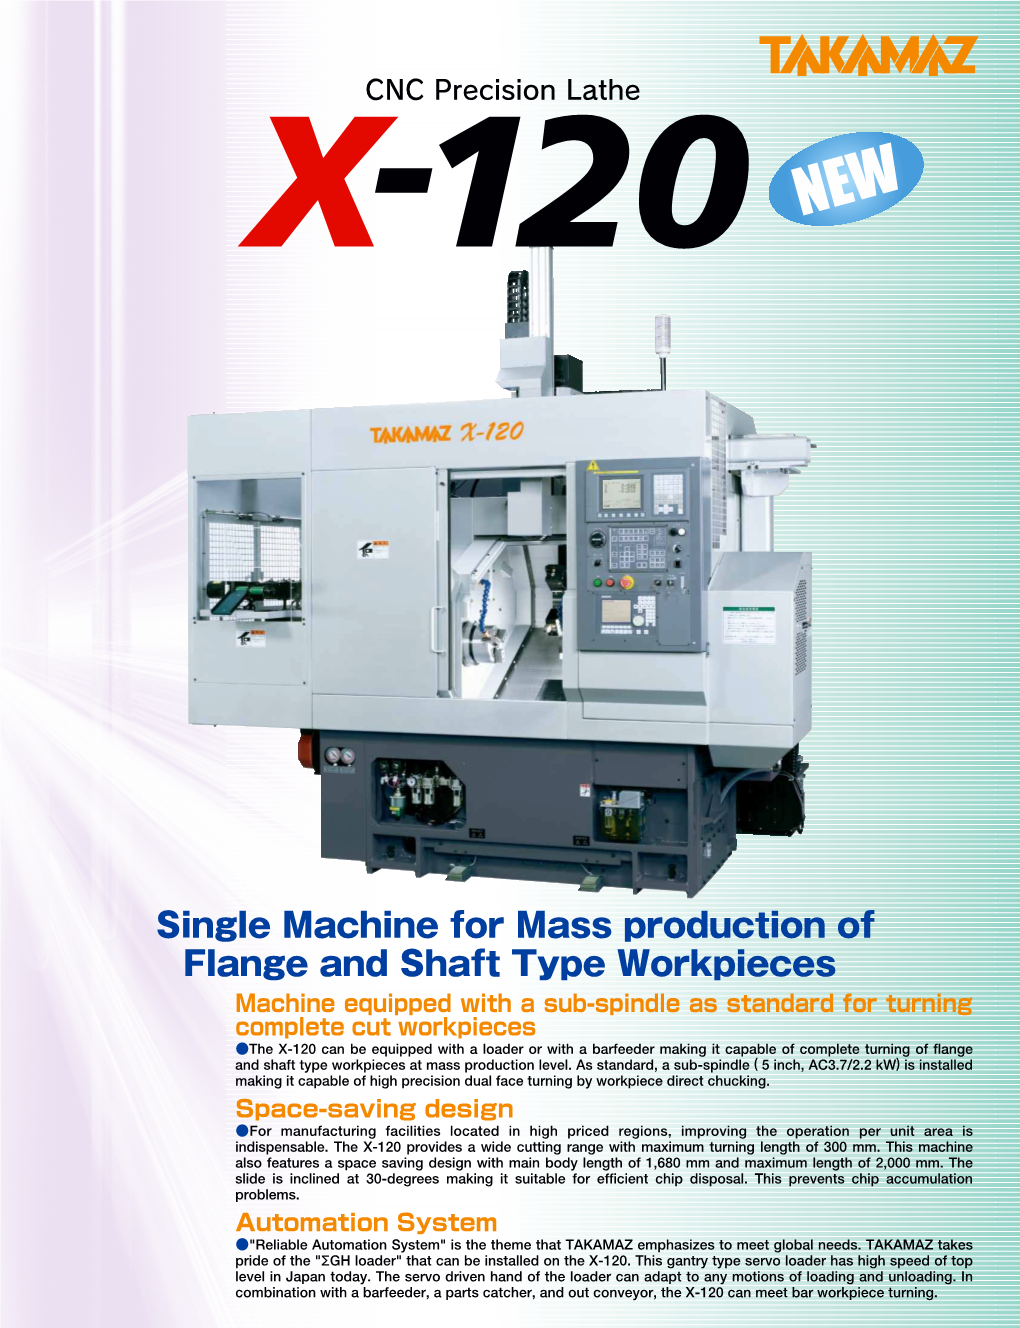 Single Machine for Mass Production of Flange and Shaft Type Workpieces